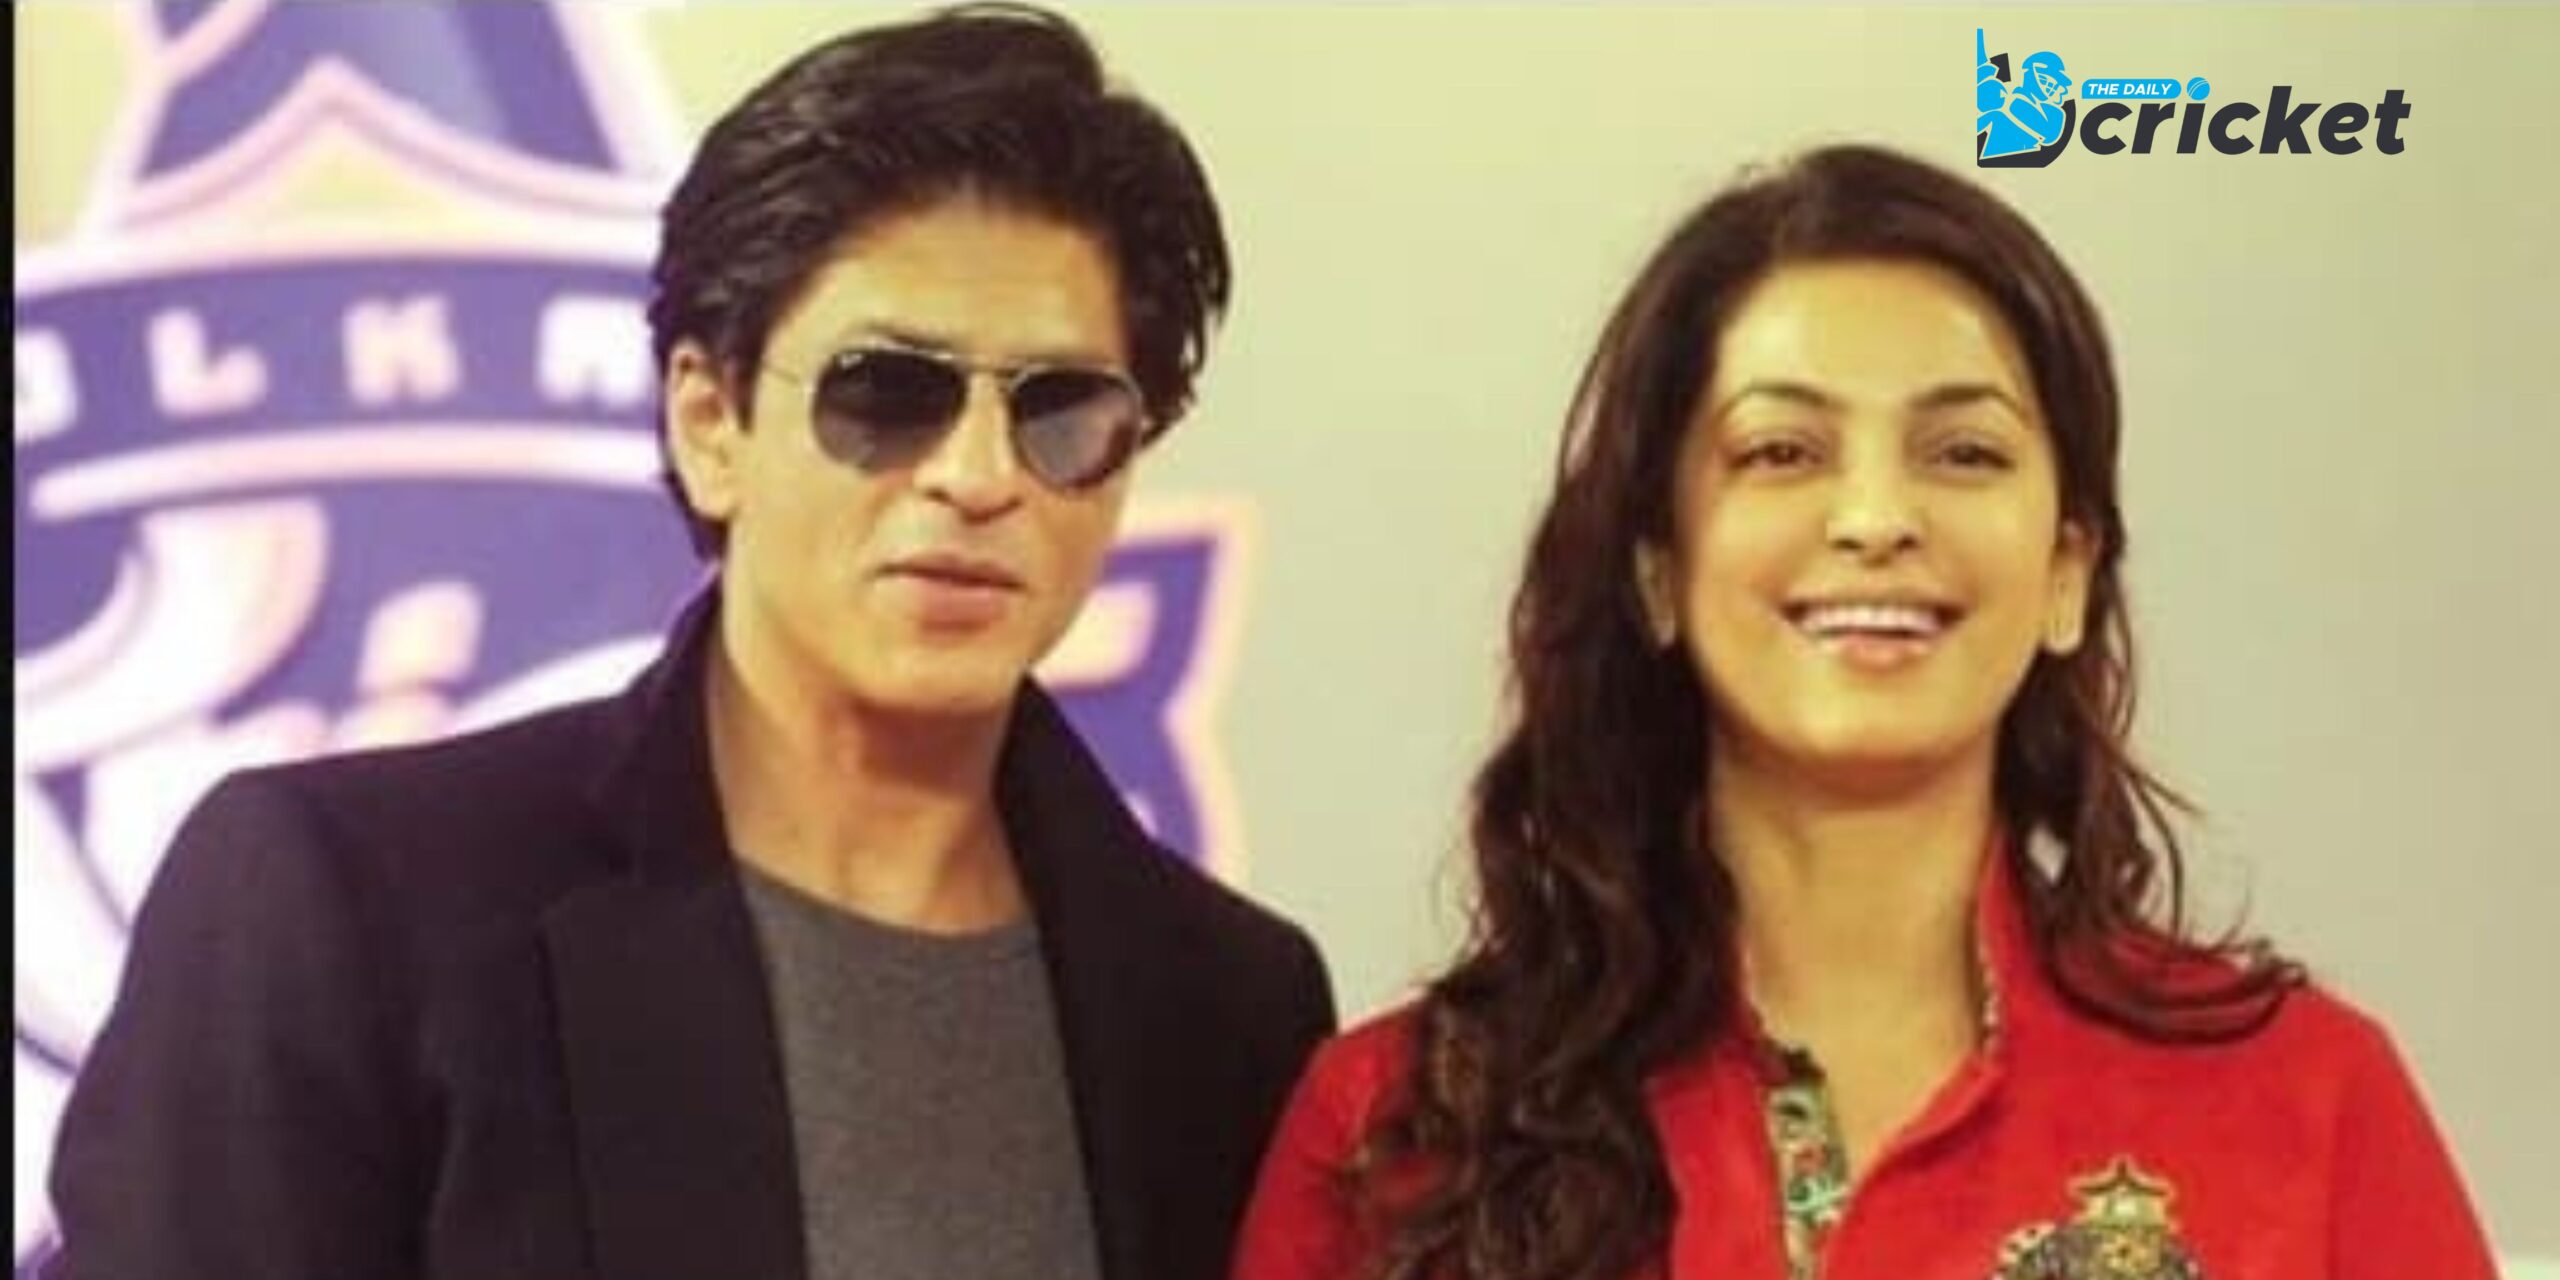 Shah Rukh Khan is feeling'much better' and will return to the stands to cheer the Kolkata Knight Riders in the IPL playoffs. Juhi Chawla